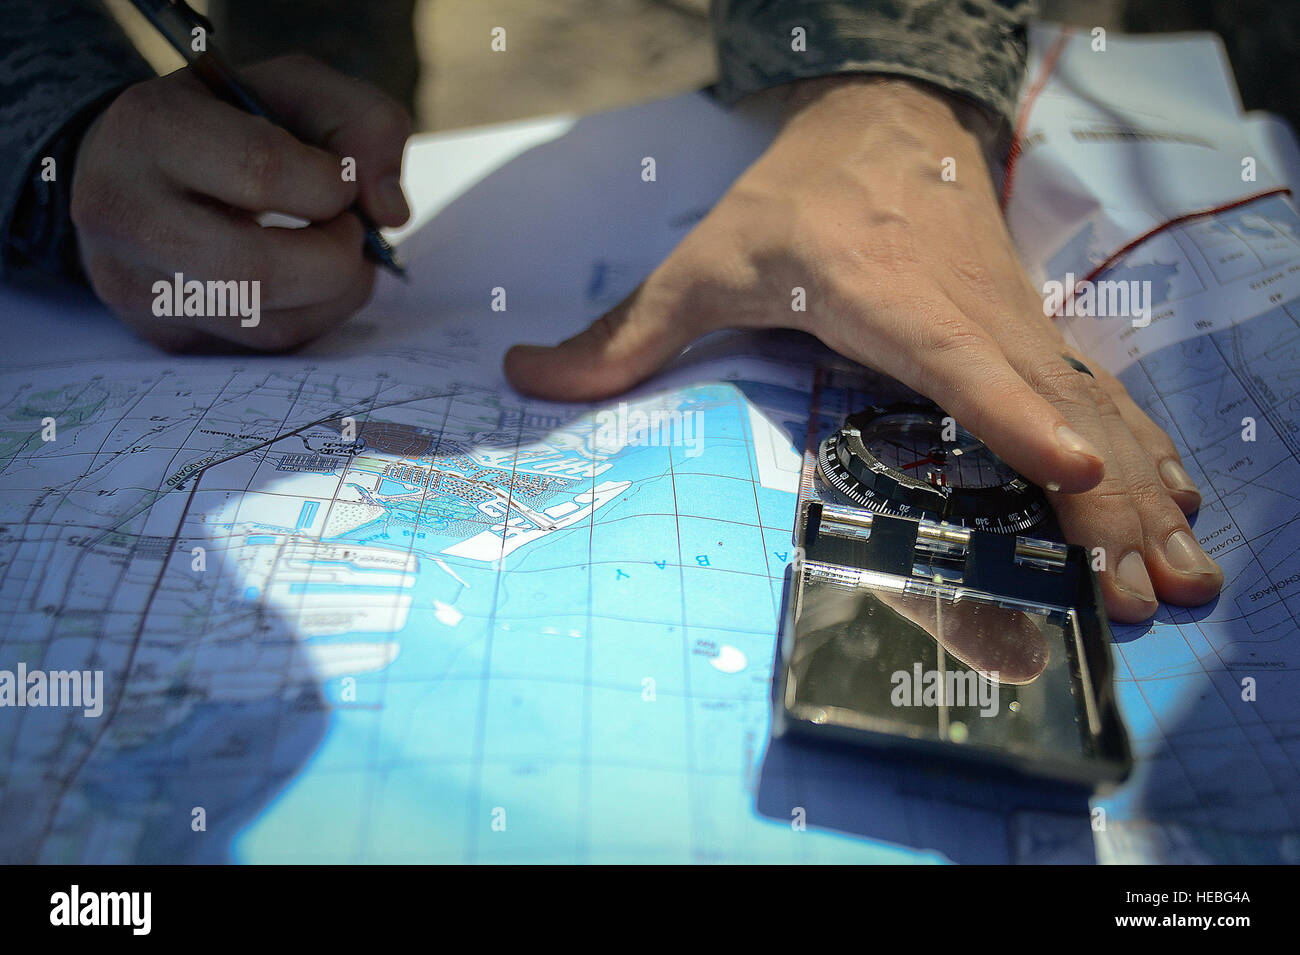 A Member of the Joint Communications Support Element assesses a map for the best communications establishment while on Pine Key Island off the coast of MacDill Air Force Base, Fla., March 4, 2015. One team setup their equipment on the base’s shoreline, another team traveled by boat to a secluded island to test their rapid deployment capabilities, and ability to communicate worldwide. (U.S. Air Force photo by Tech. Sgt. Brandon Shapiro/Released) Stock Photo